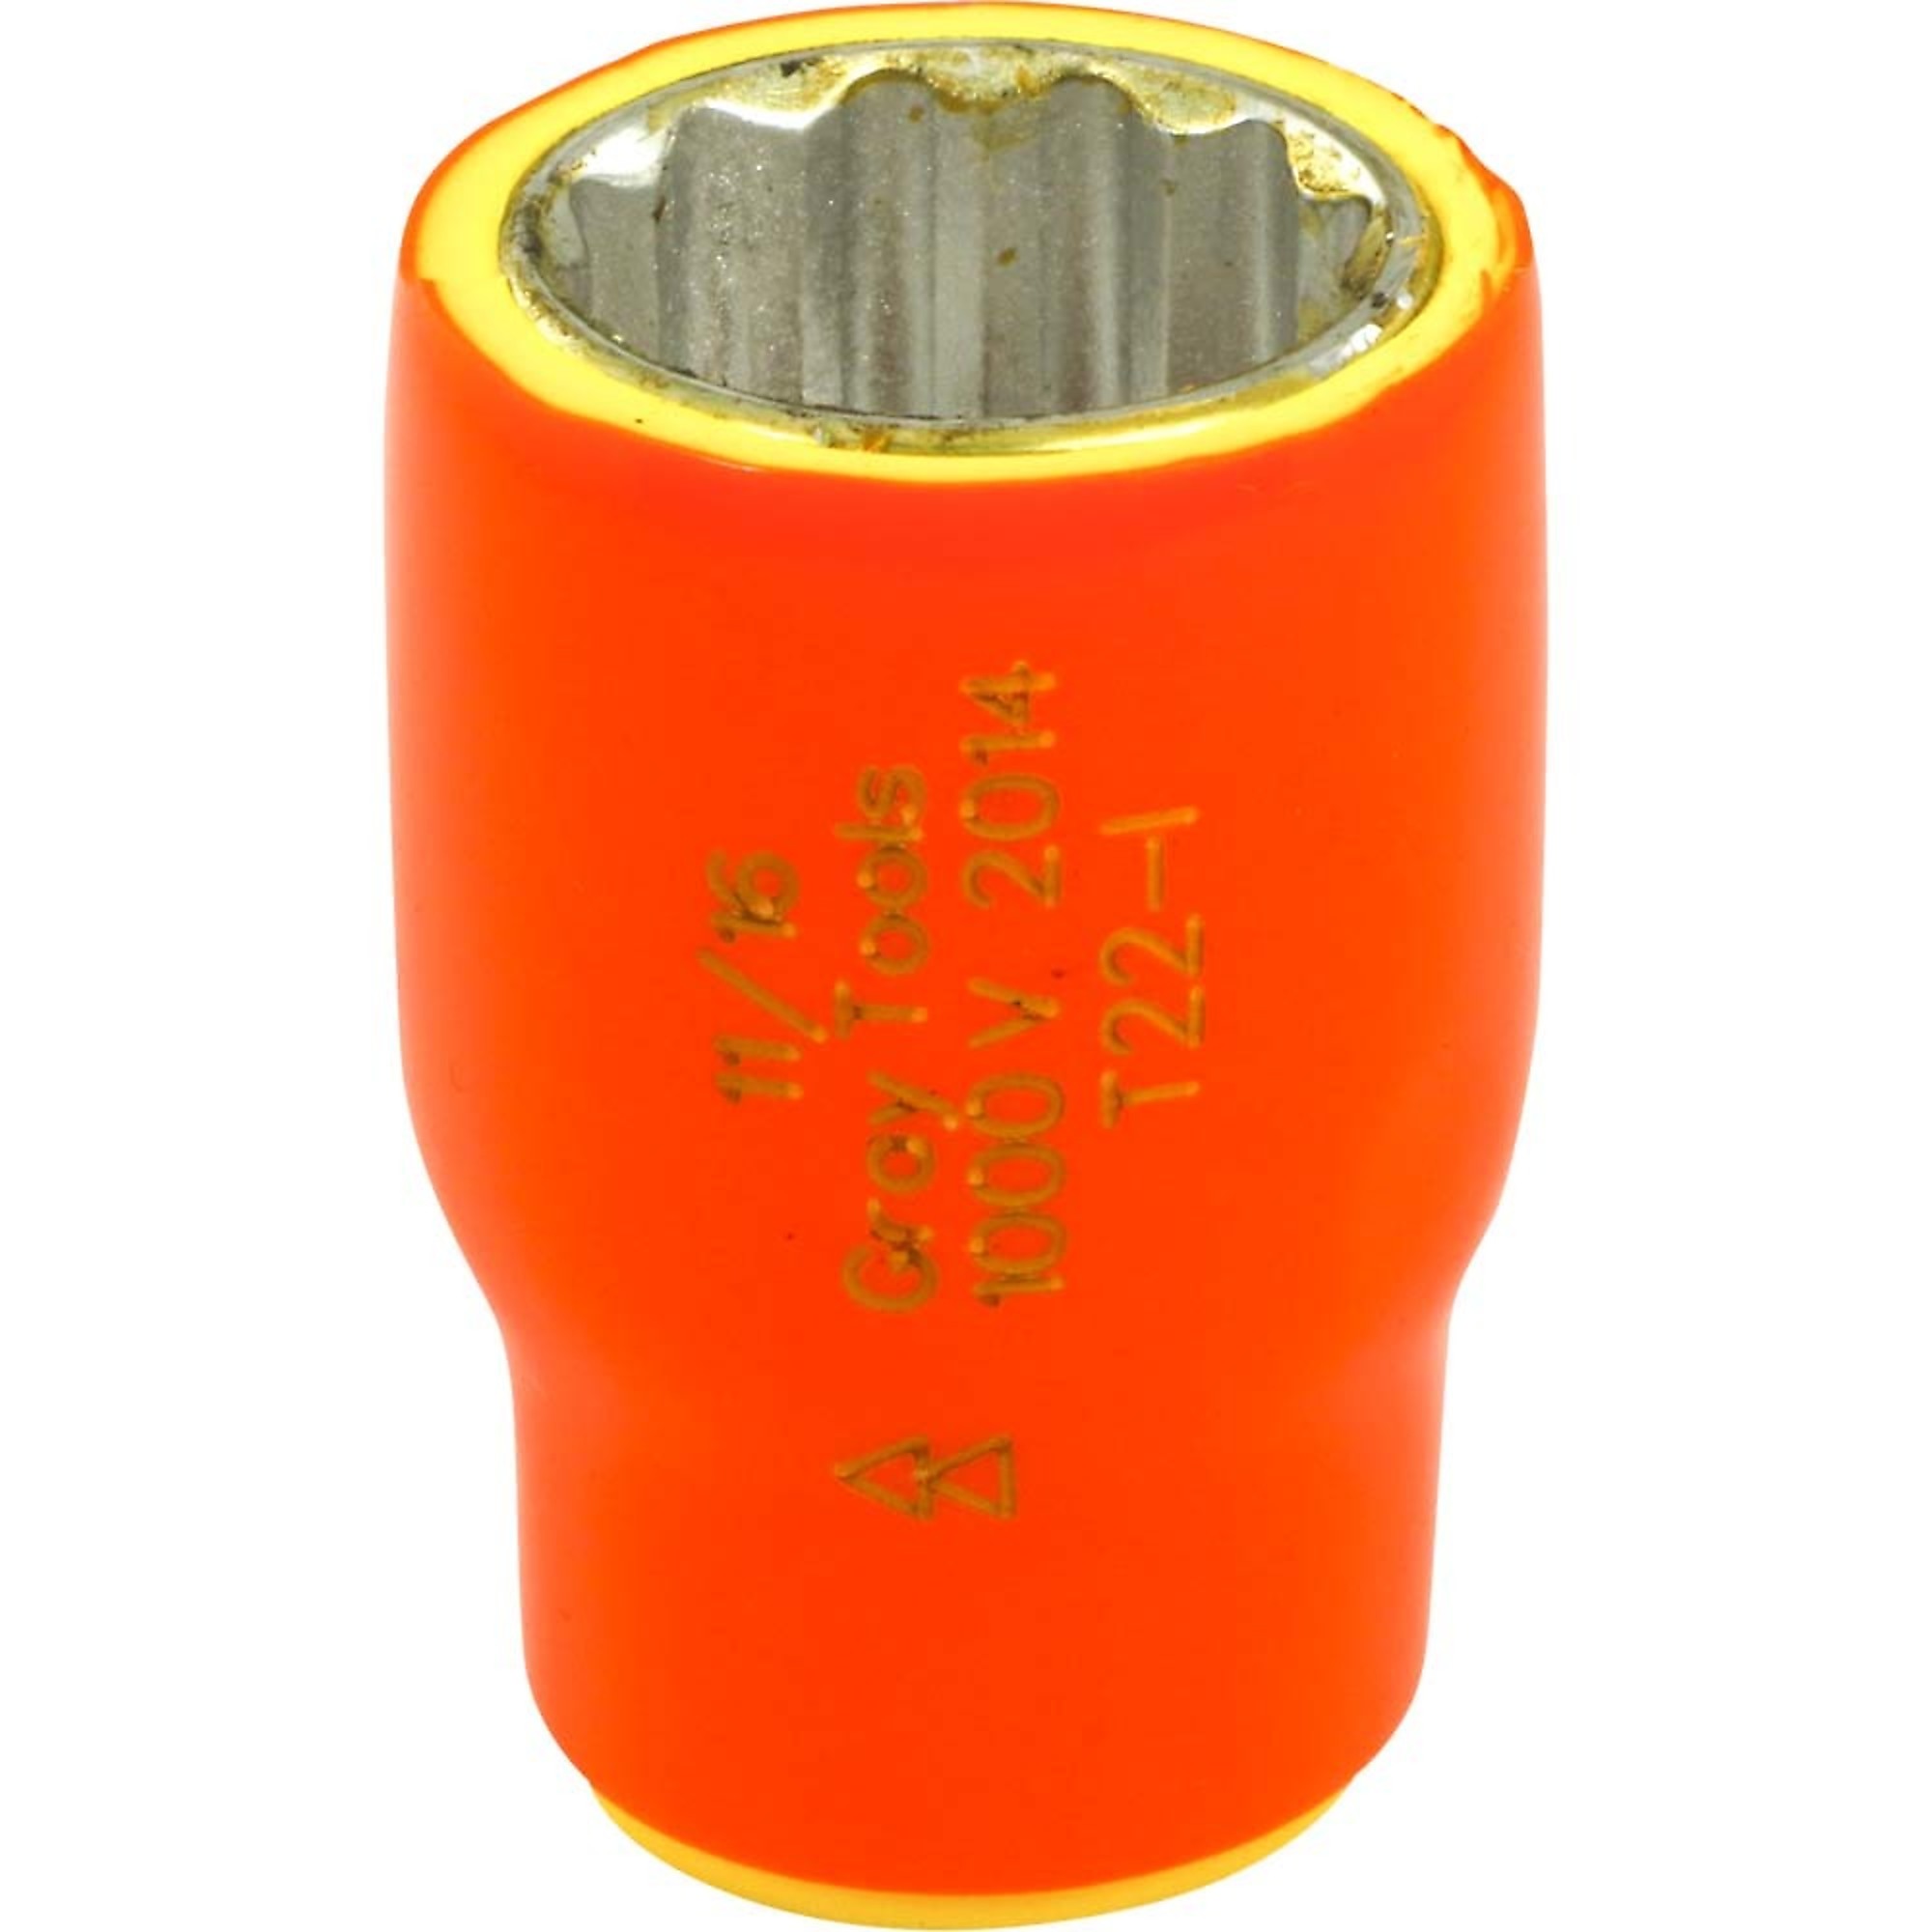 Gray Tools, 11/16Inch X 3/8Inch Drive Socket 1000V Insulated, Socket Size 11/16 in, Drive Size 3/8 in, Model T22-I